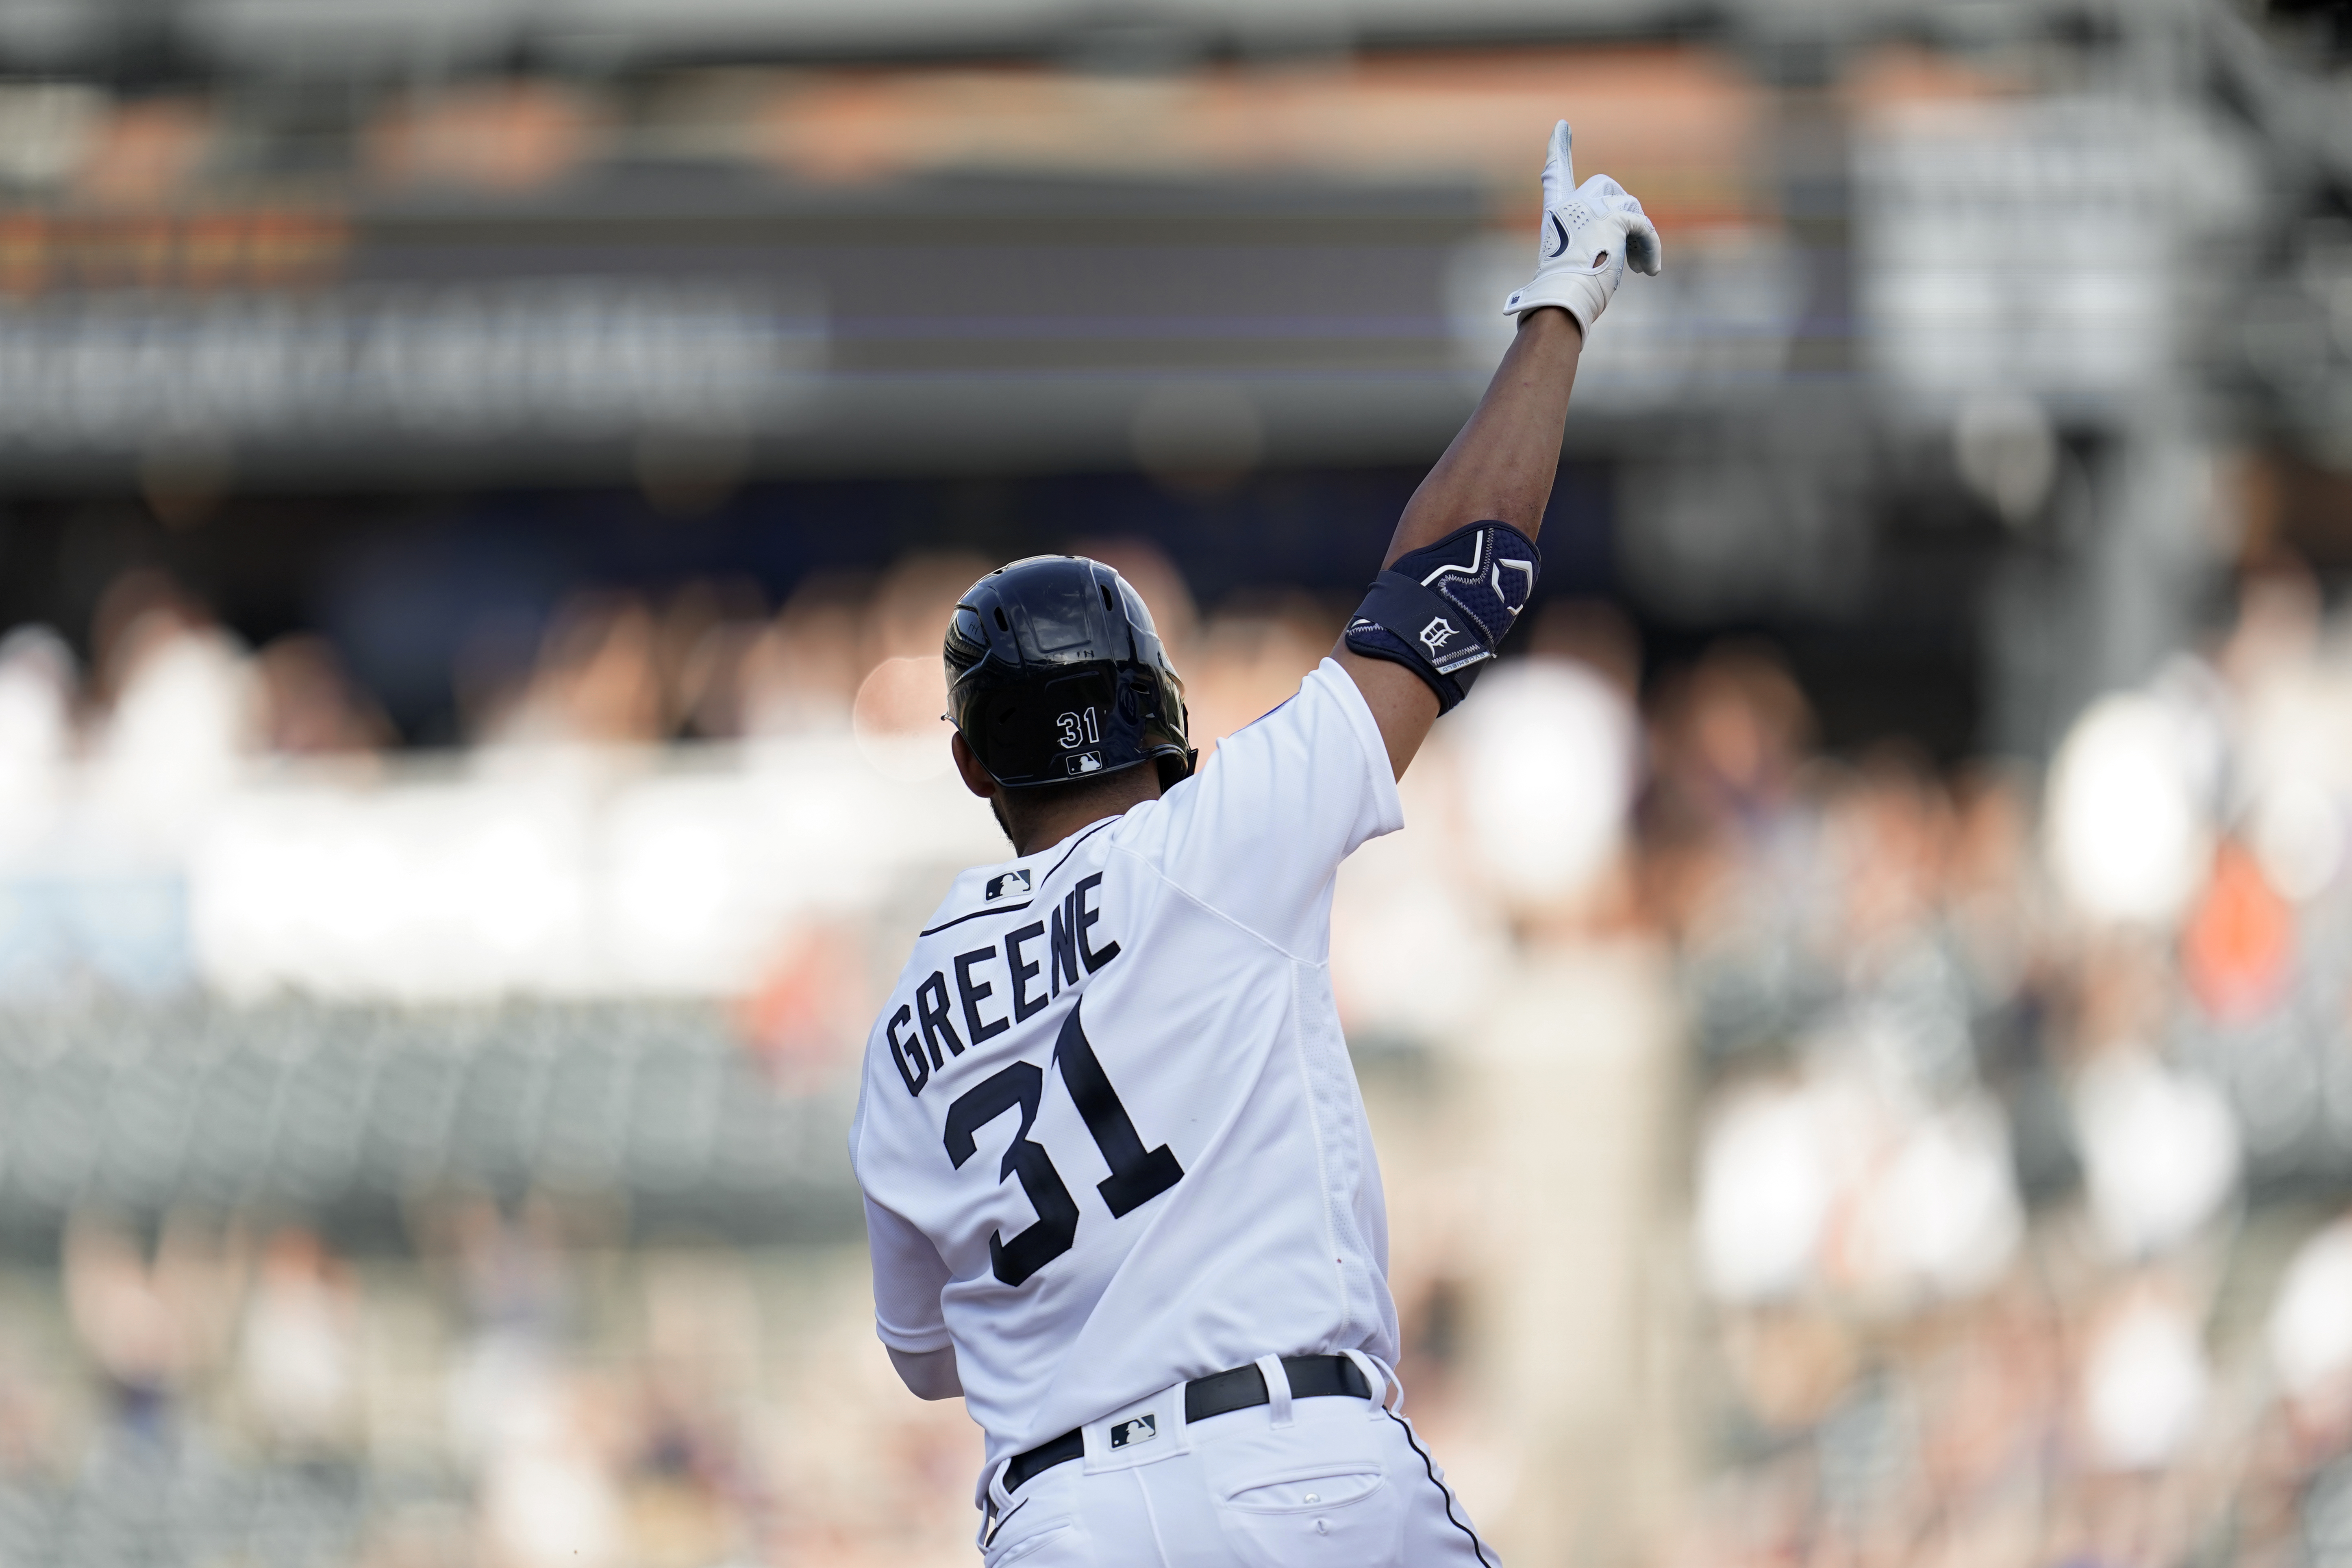 Tigers rookie Riley Greene's first MLB home run was an